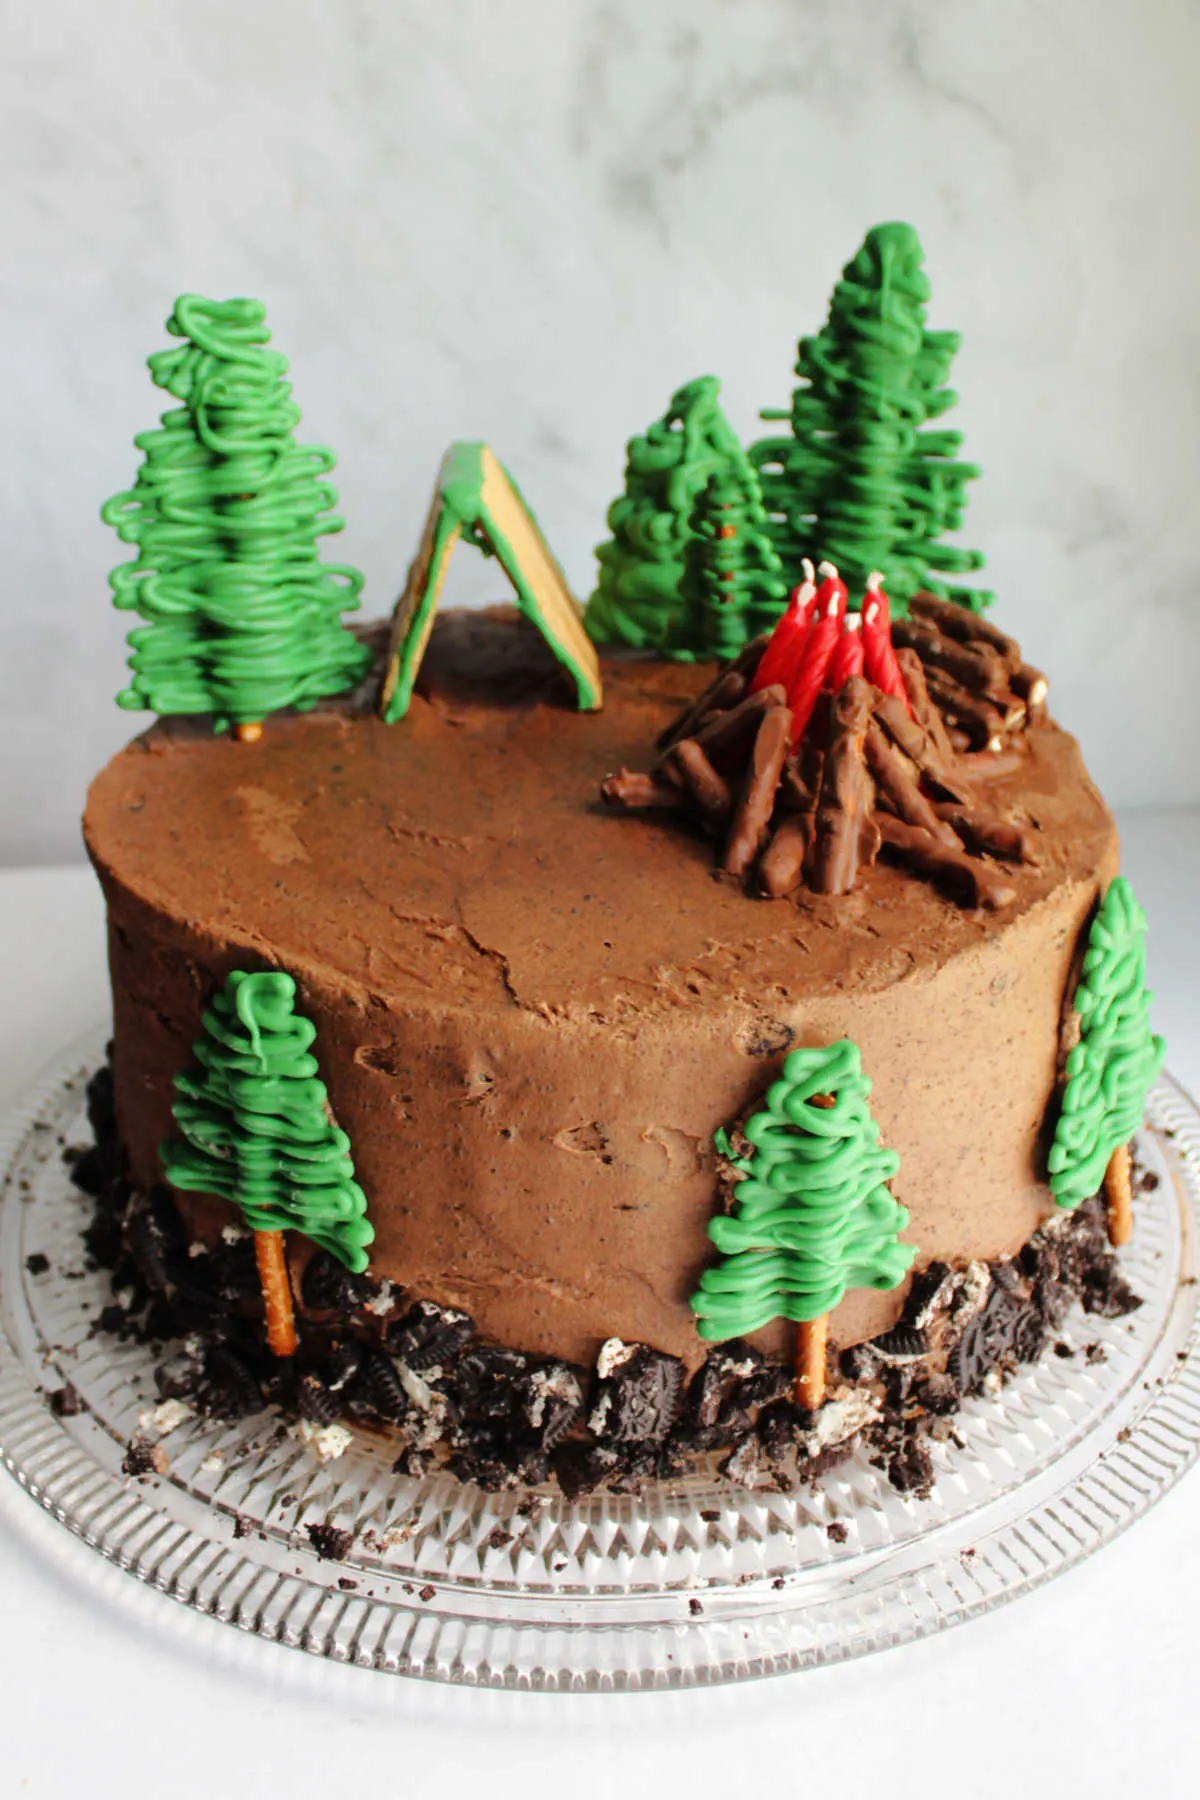 Round cake decorated in camping theme with chocolate oreo frosting, green chocolate trees, a graham cracker tent and chocolate dipped pretzel campfire.